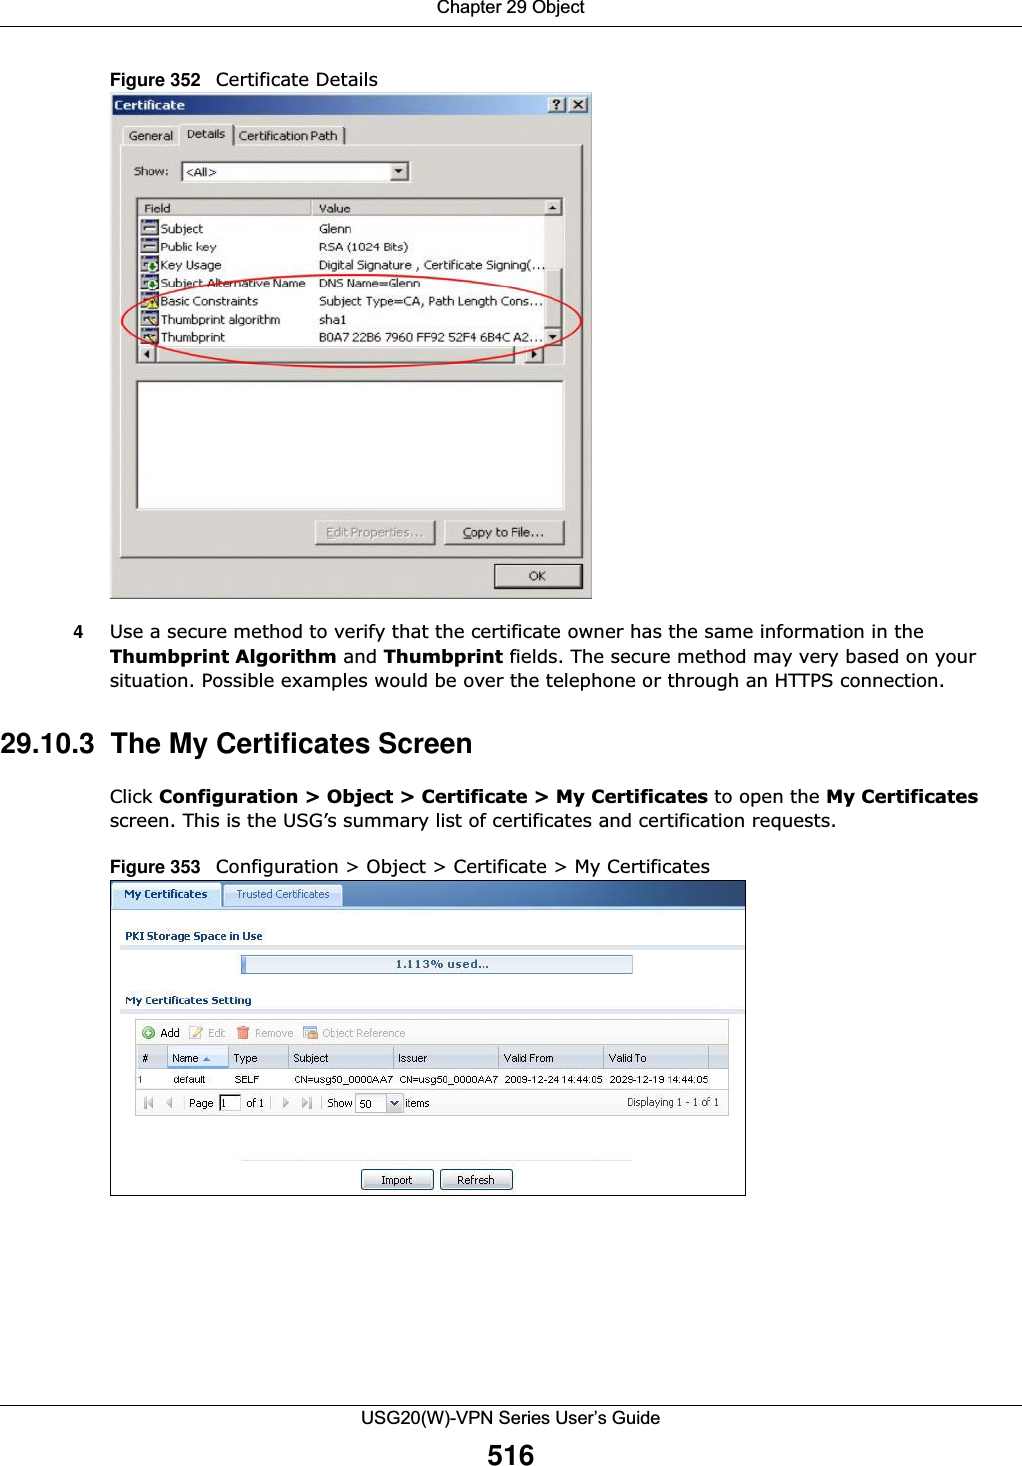 Chapter 29 ObjectUSG20(W)-VPN Series User’s Guide516Figure 352   Certificate Details 4Use a secure method to verify that the certificate owner has the same information in the Thumbprint Algorithm and Thumbprint fields. The secure method may very based on your situation. Possible examples would be over the telephone or through an HTTPS connection. 29.10.3  The My Certificates Screen Click Configuration &gt; Object &gt; Certificate &gt; My Certificates to open the My Certificates screen. This is the USG’s summary list of certificates and certification requests.Figure 353   Configuration &gt; Object &gt; Certificate &gt; My Certificates      